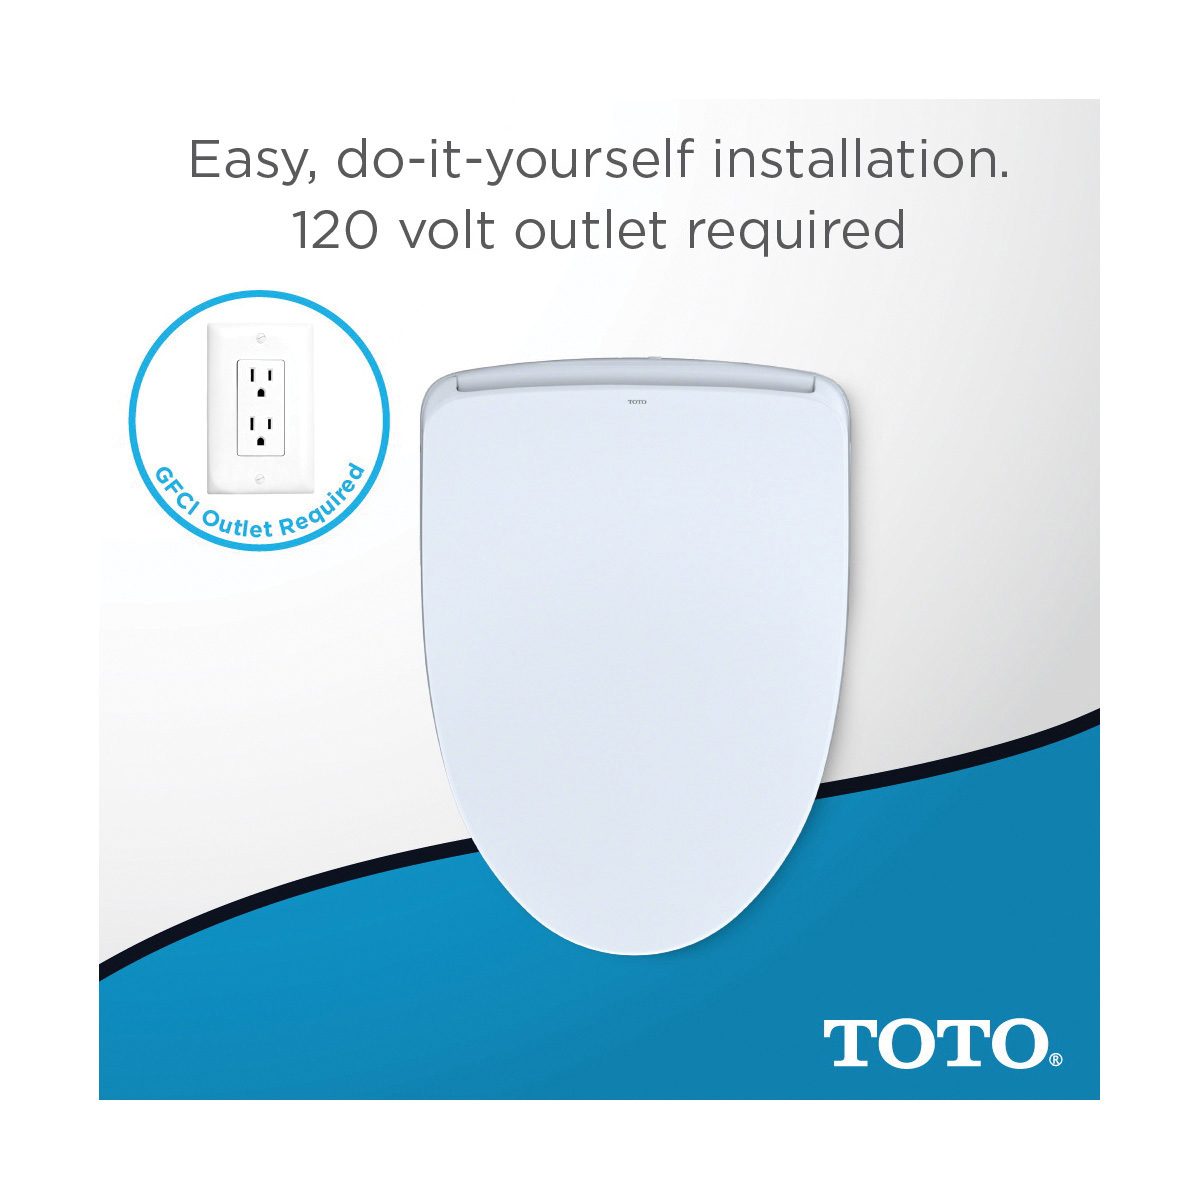 Toto® TOTOSW3046-01